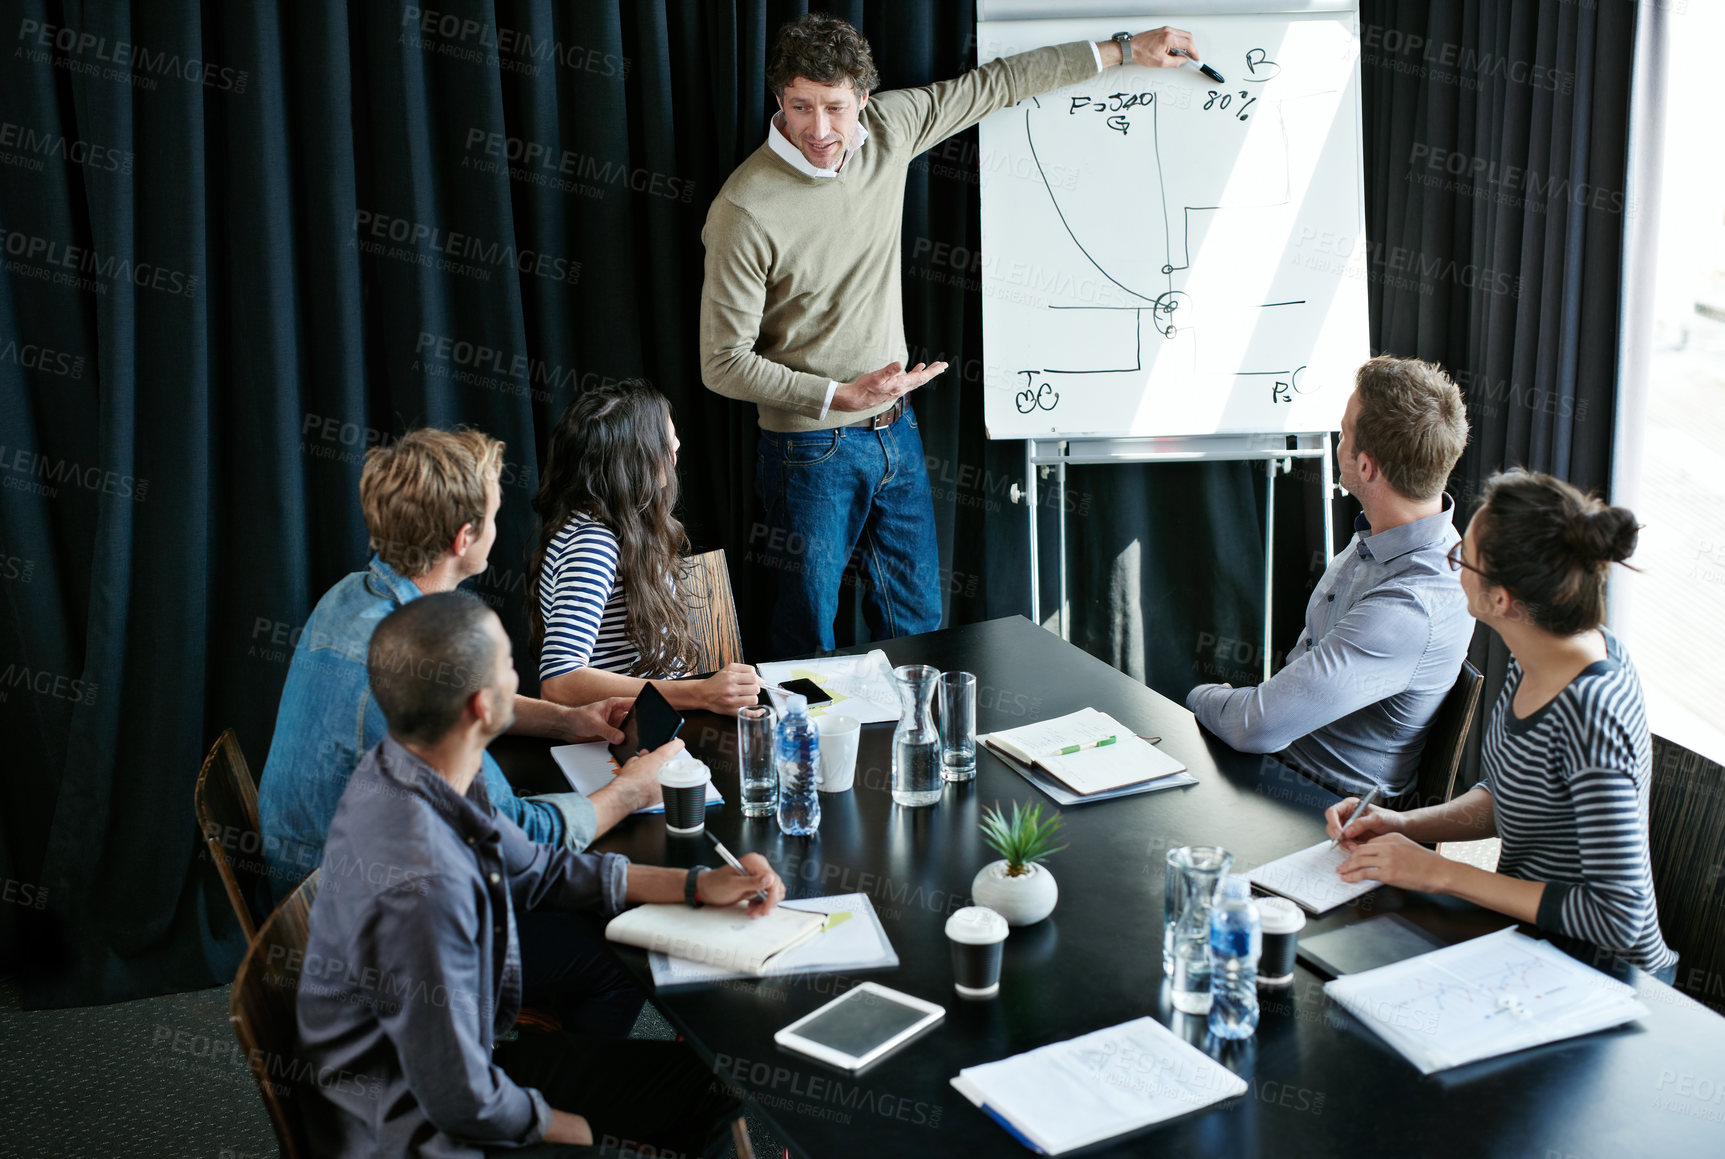 Buy stock photo Shot of a man giving a presentation on a whiteboard to colleagues sitting around a table in a boardroom